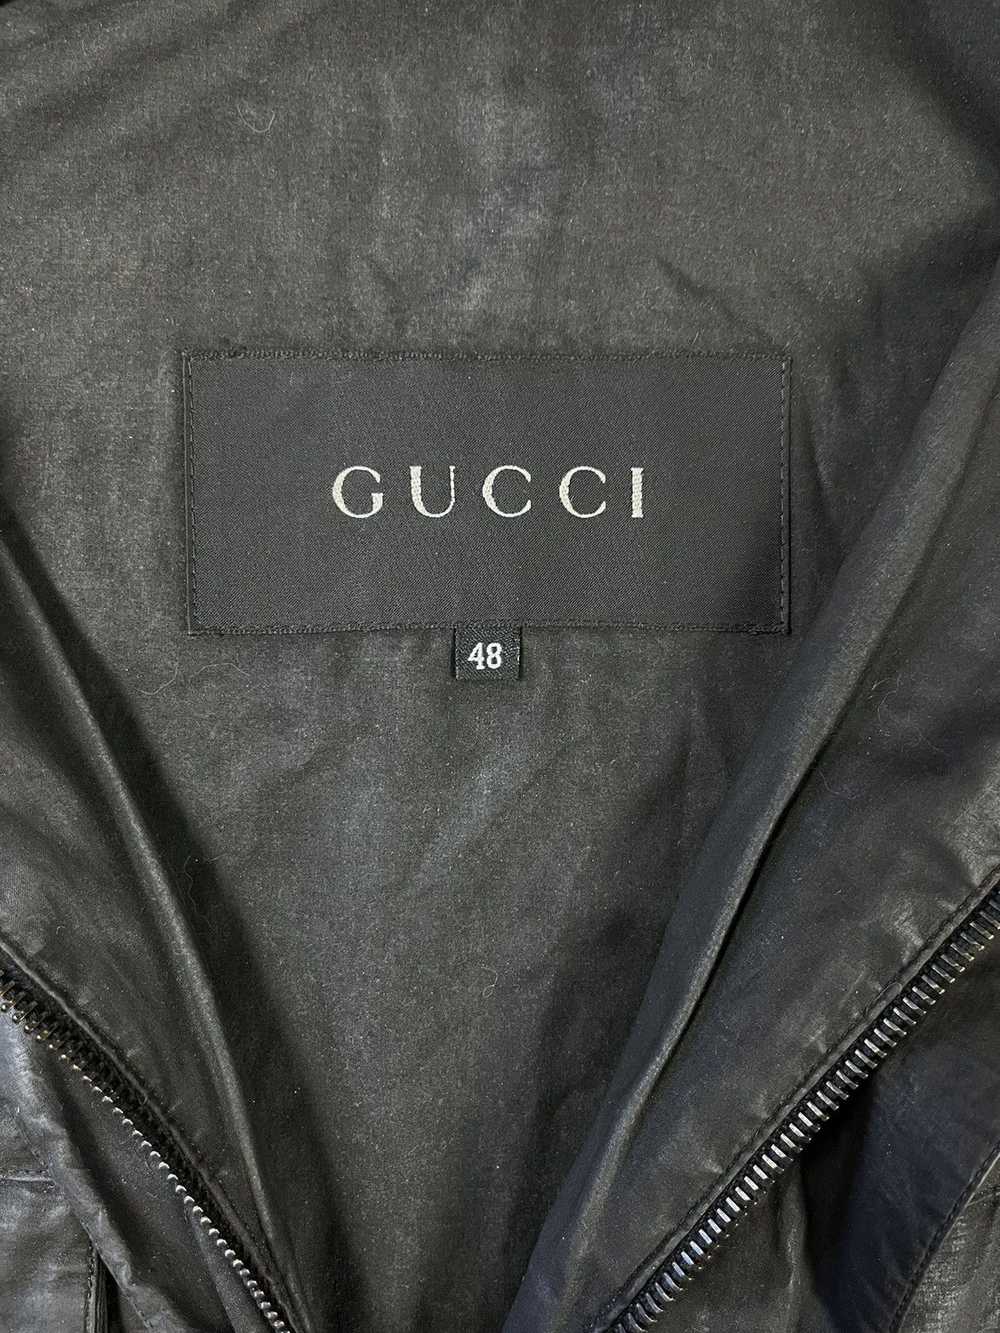 Gucci × Tom Ford Gucci Tom Ford - 90’s Coated Saf… - image 6